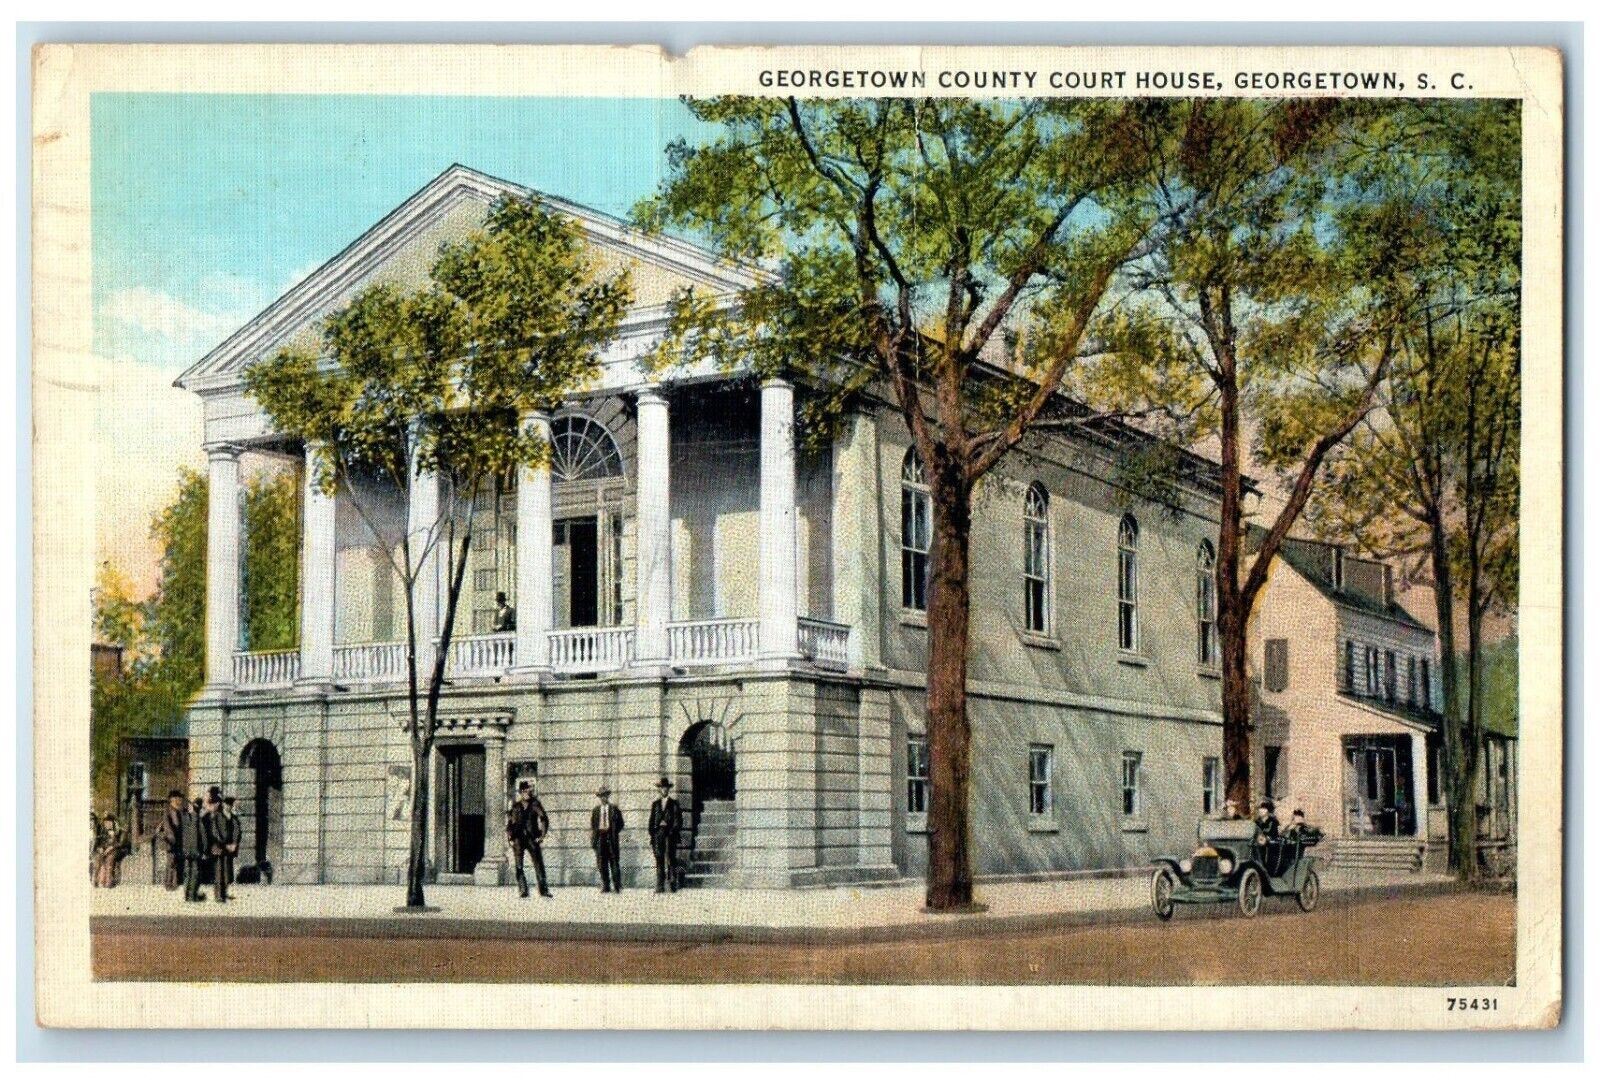 1938 Exterior Georgetown County Court House Georgetown South Carolina Postcard